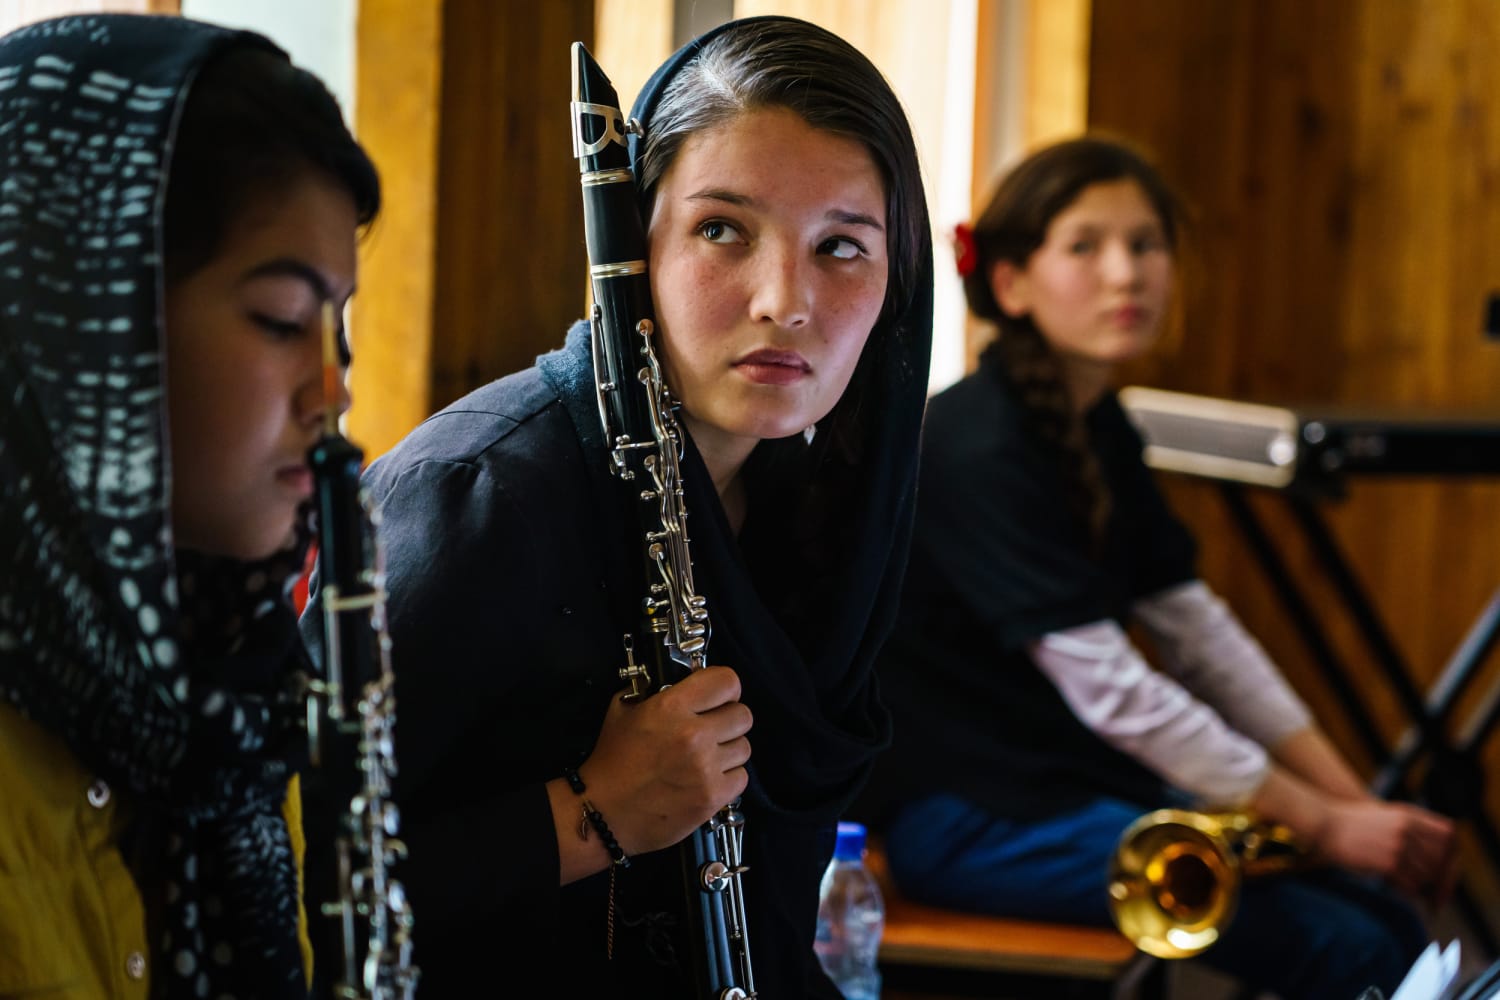 Fleeing Taliban, Afghanistan’s only music school completes exit from country